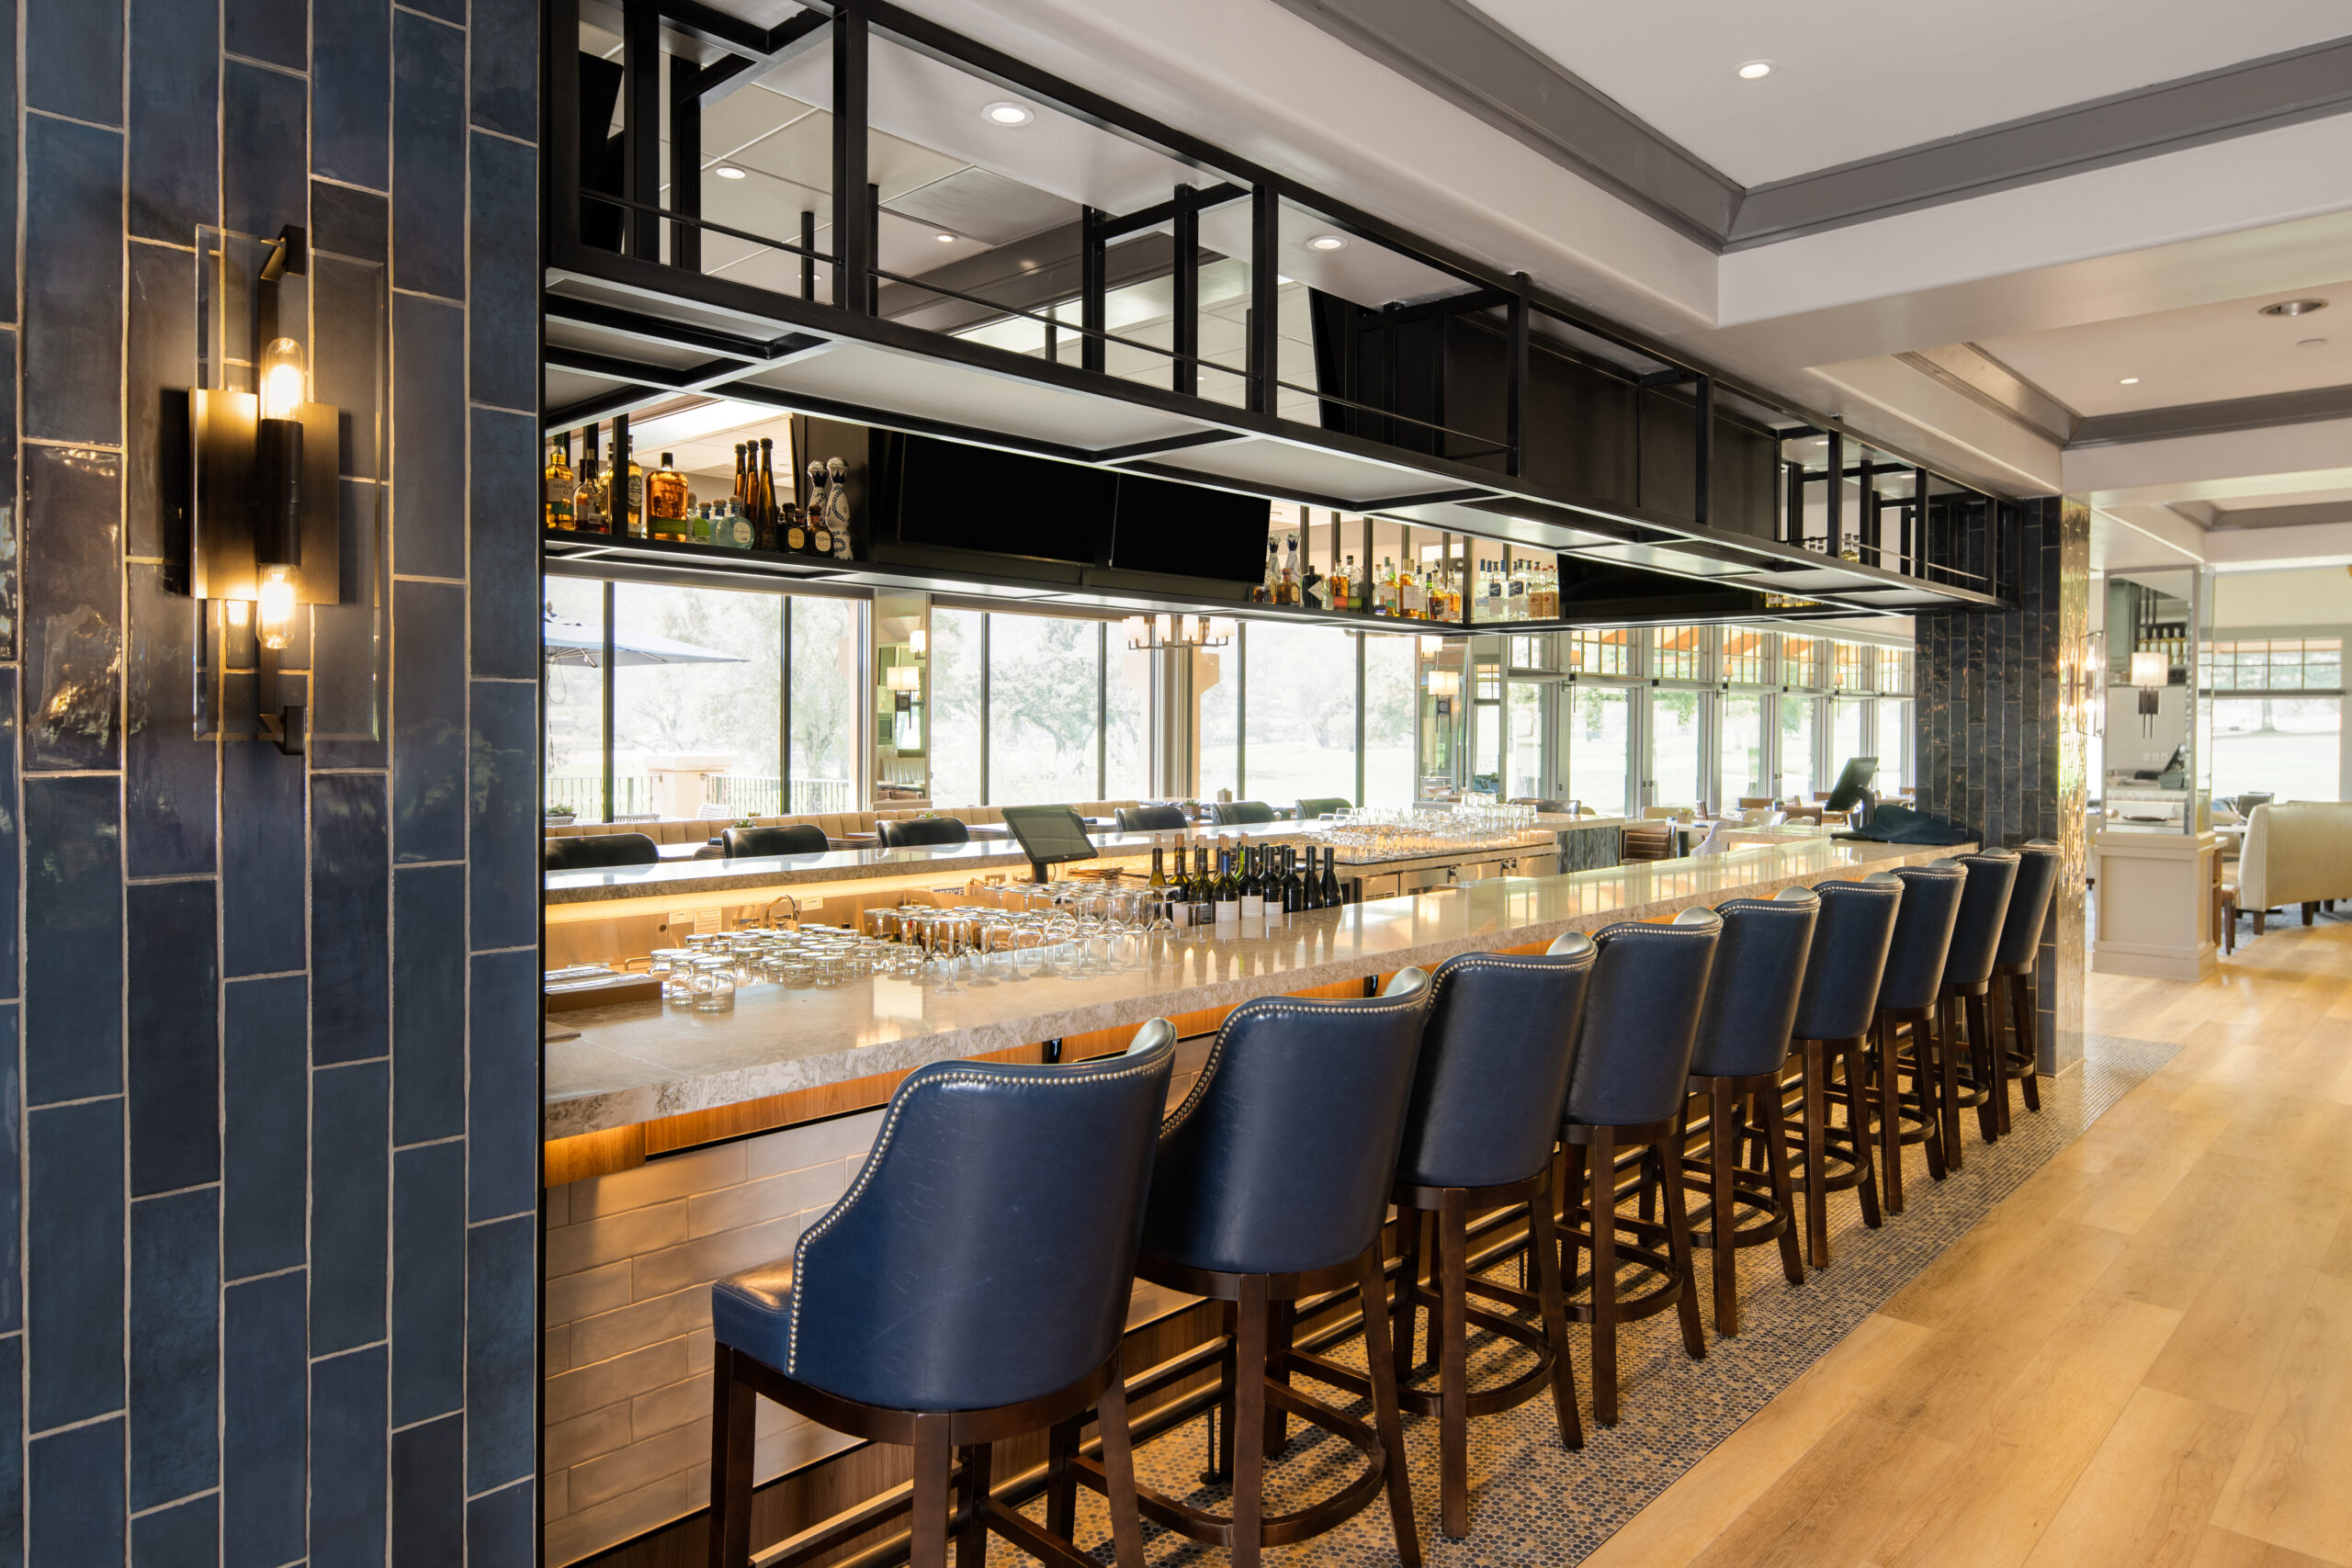 Sophisticated country club bar and restaurant interior design, blue bar seating with shelving, glasses